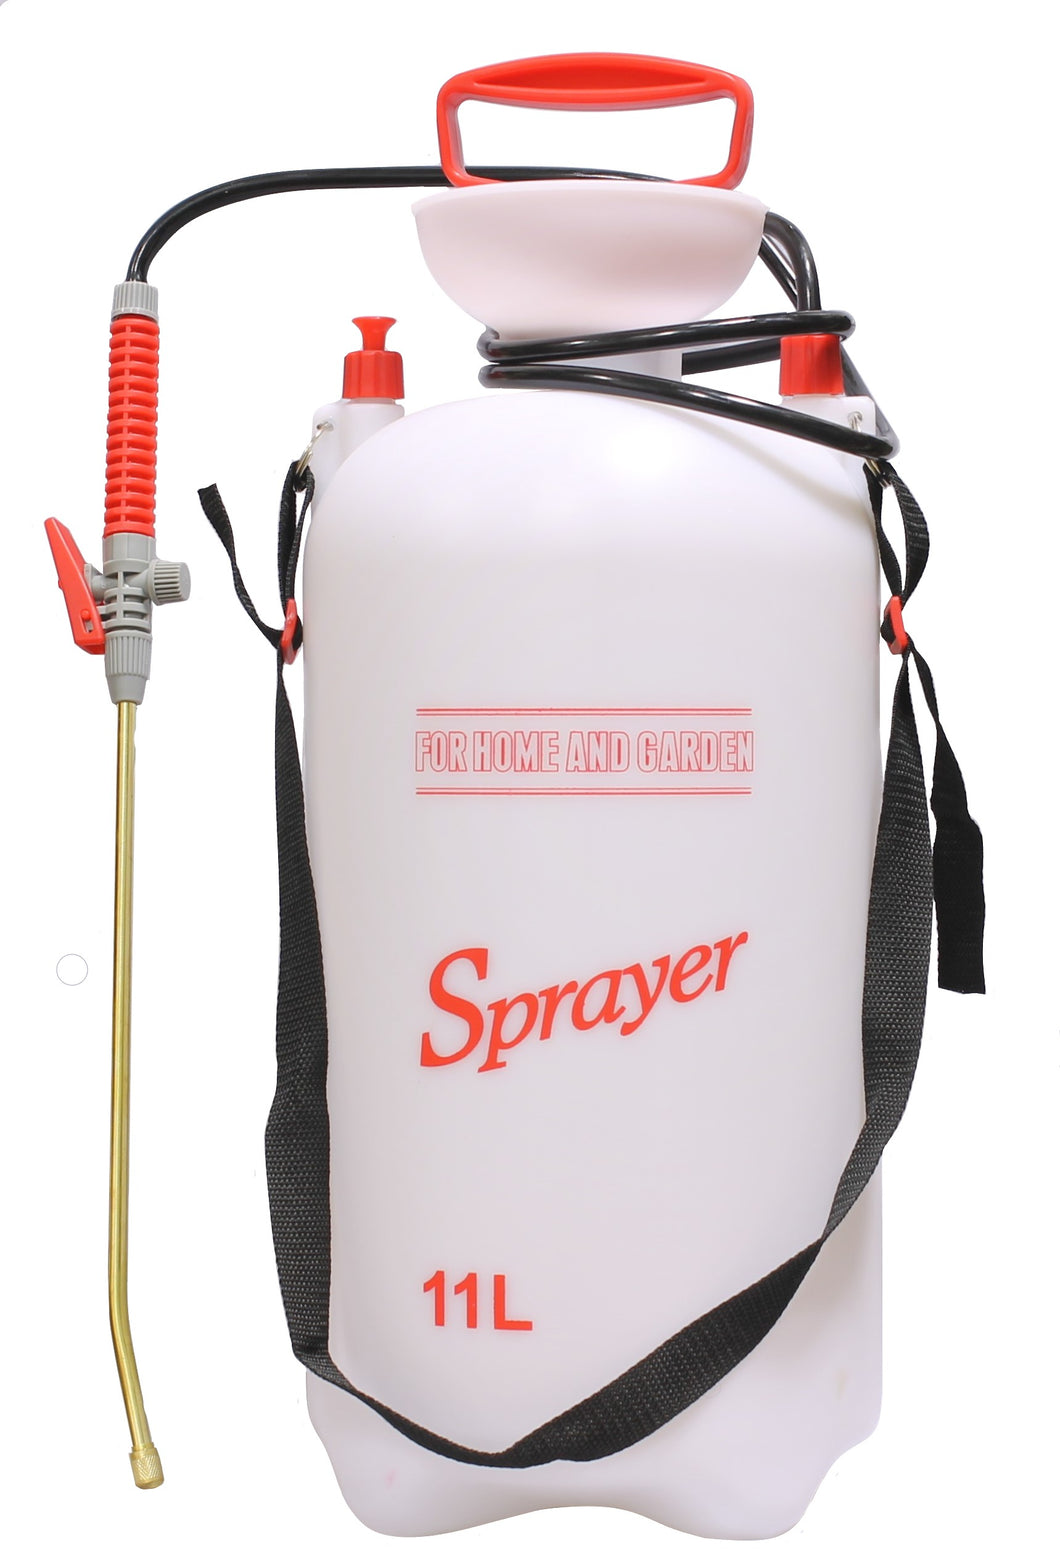 CHS 11 Litre White backpack pesticide/insecticide Sprayer with red handled Brass tip wand 